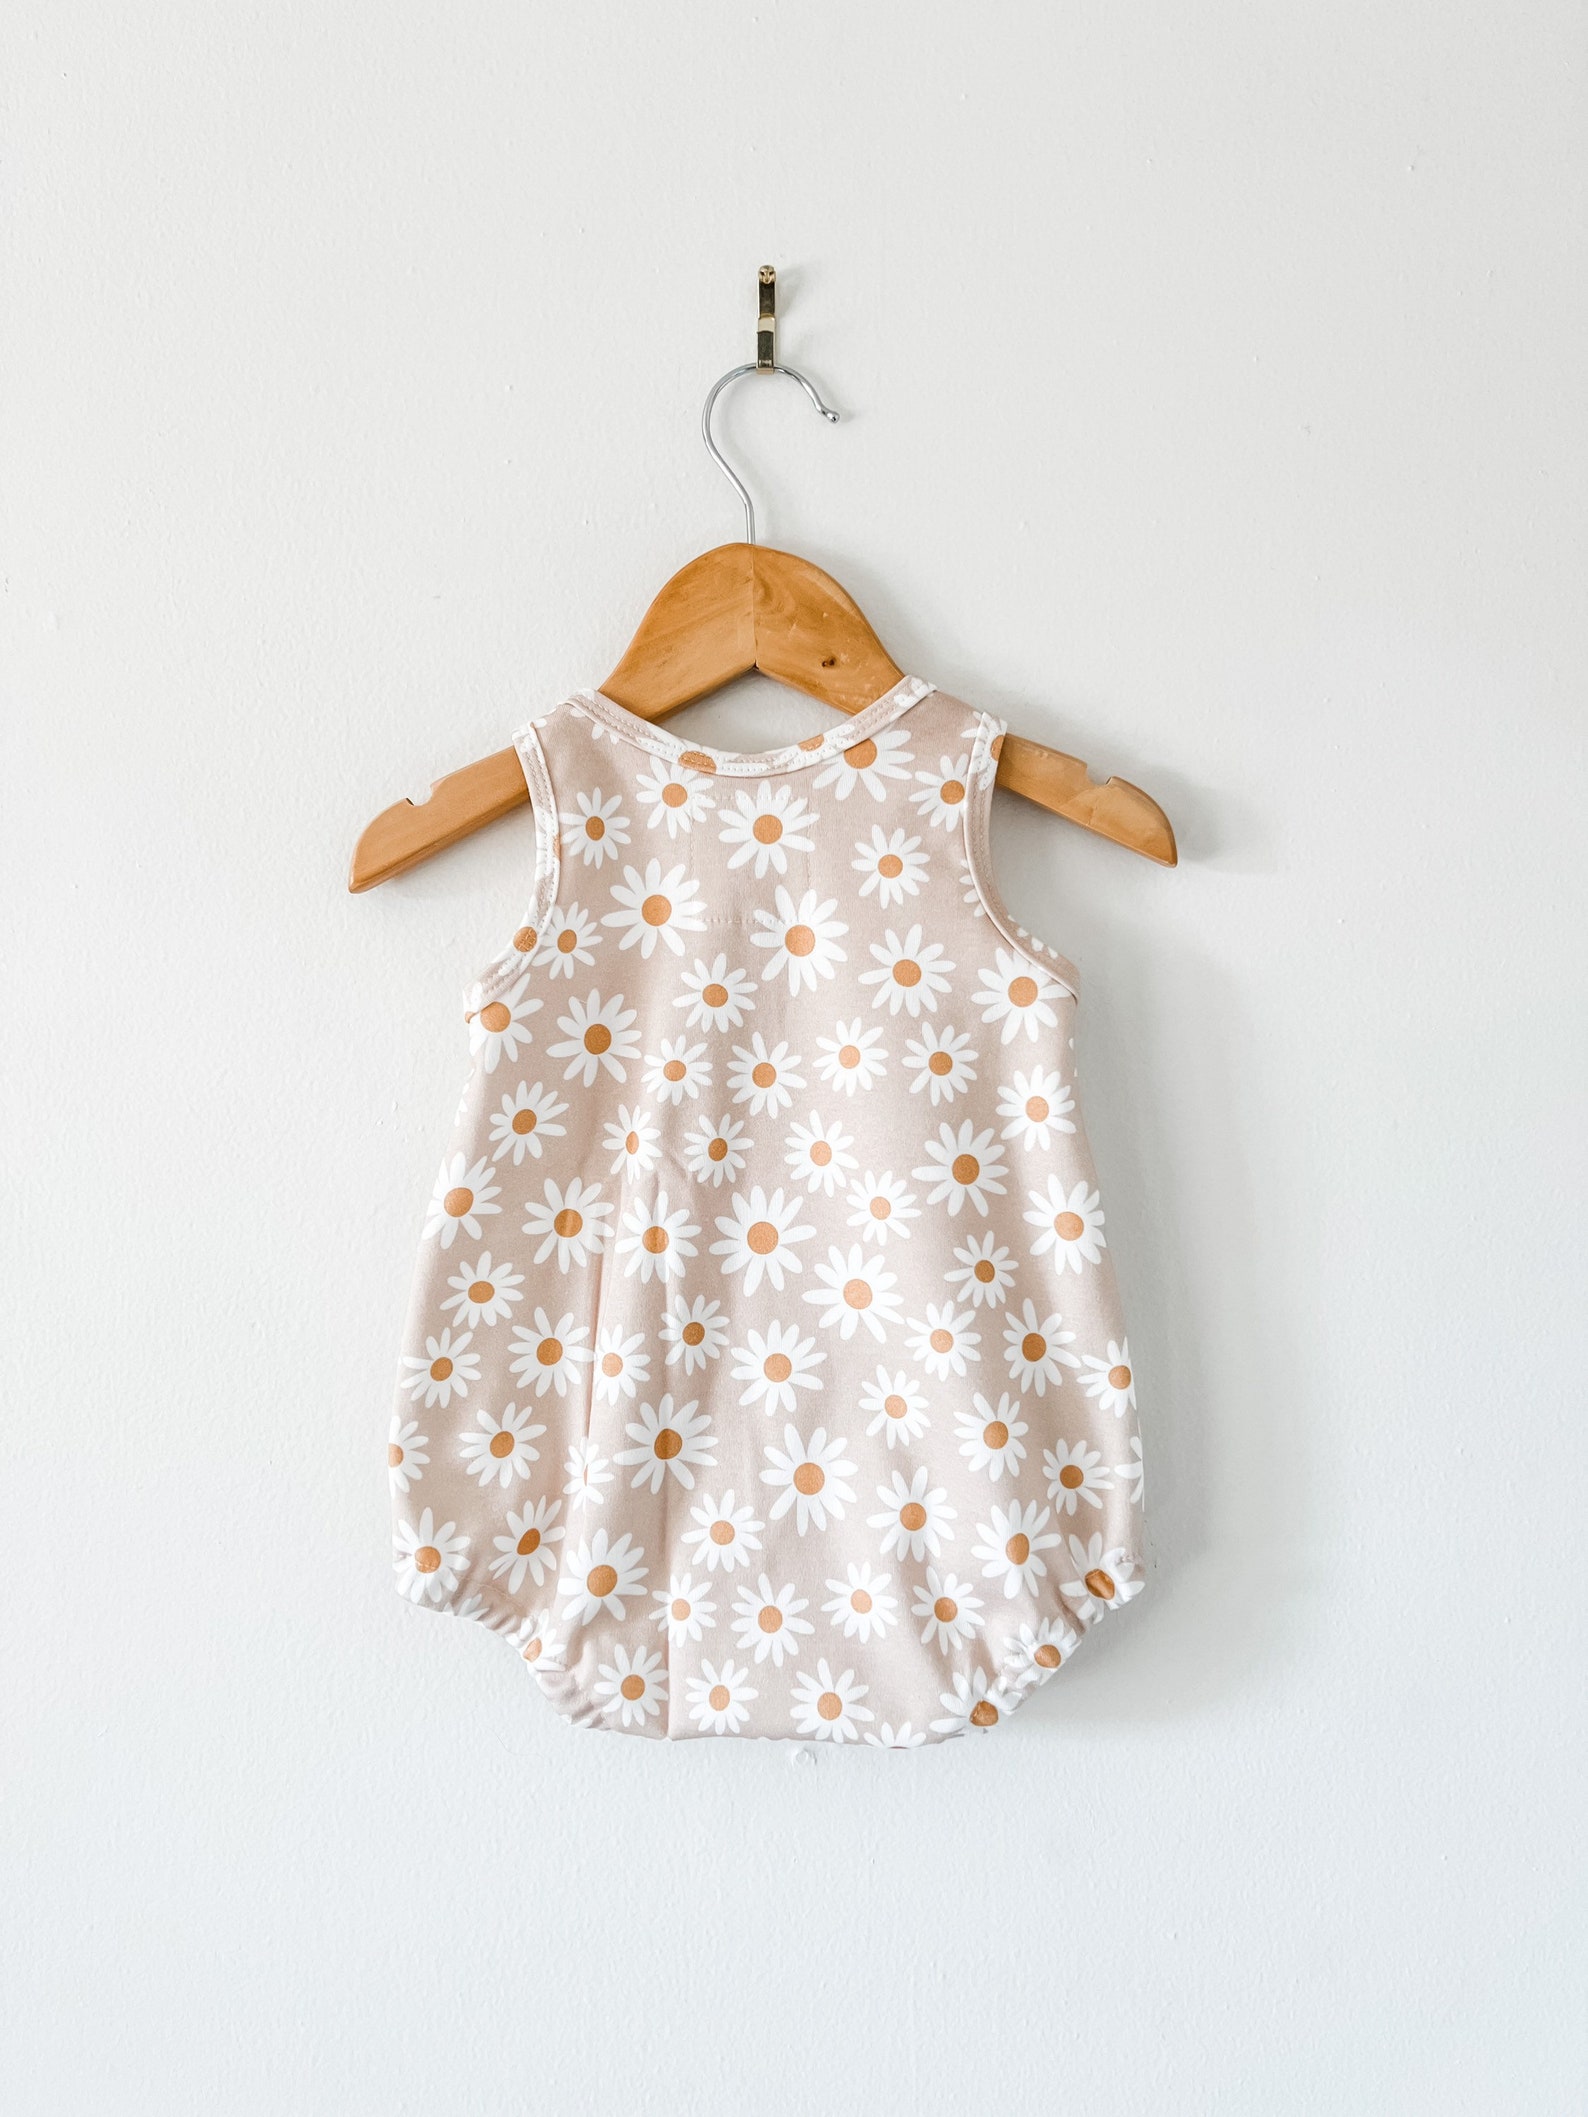 Daisy Baby Romper // Organic Baby Clothes // Baby Clothing / - Etsy